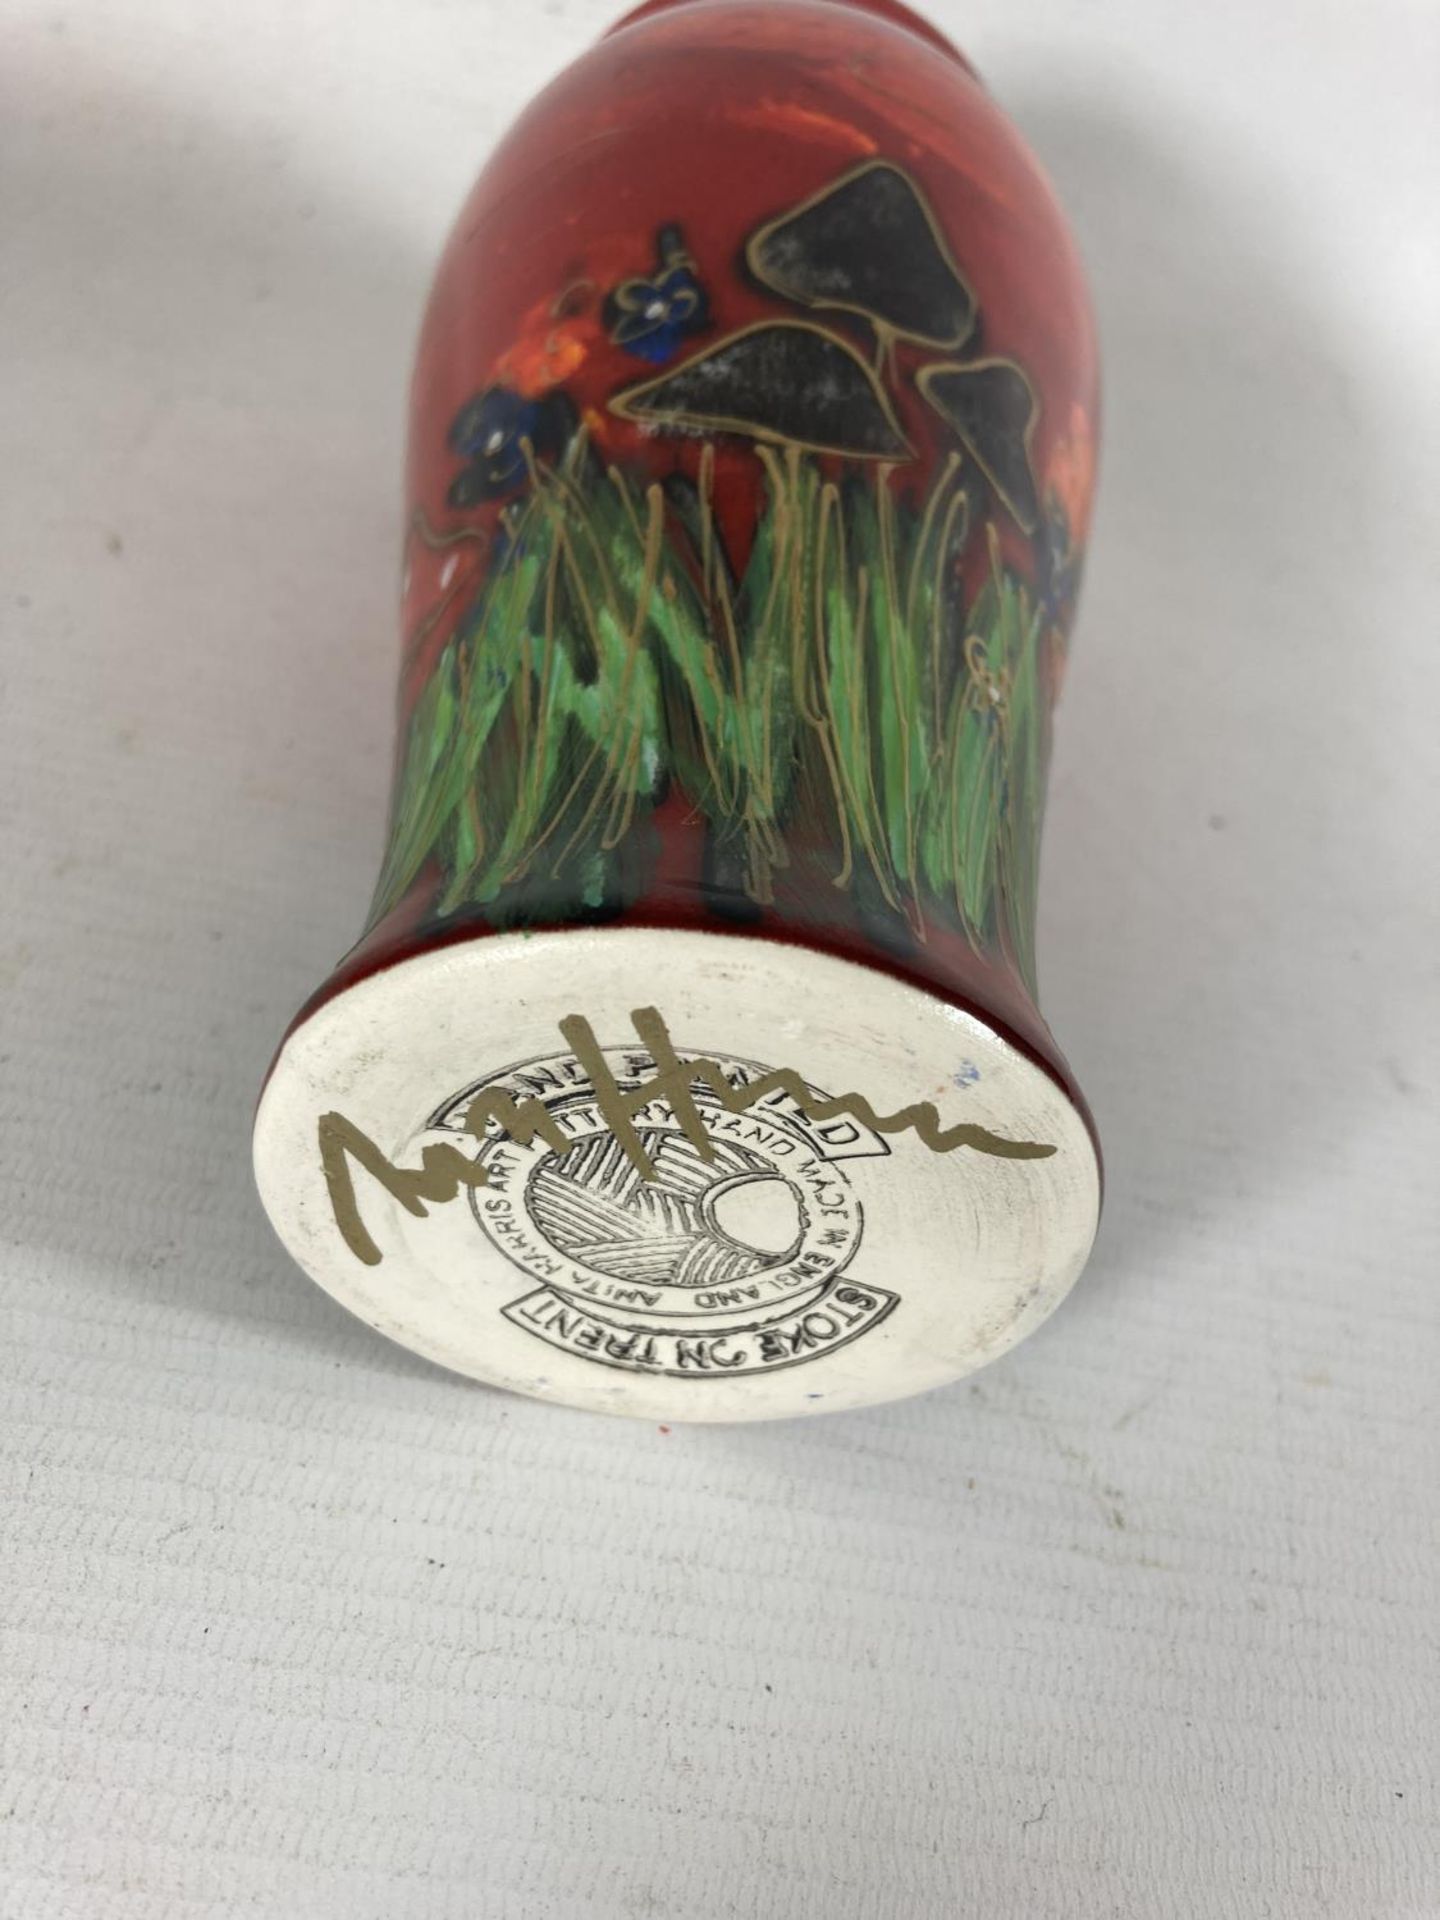 AN ANITA HARRIS TOADSTOOLS VASE HAND PAINTED AND SIGNED IN GOLD - Image 3 of 3